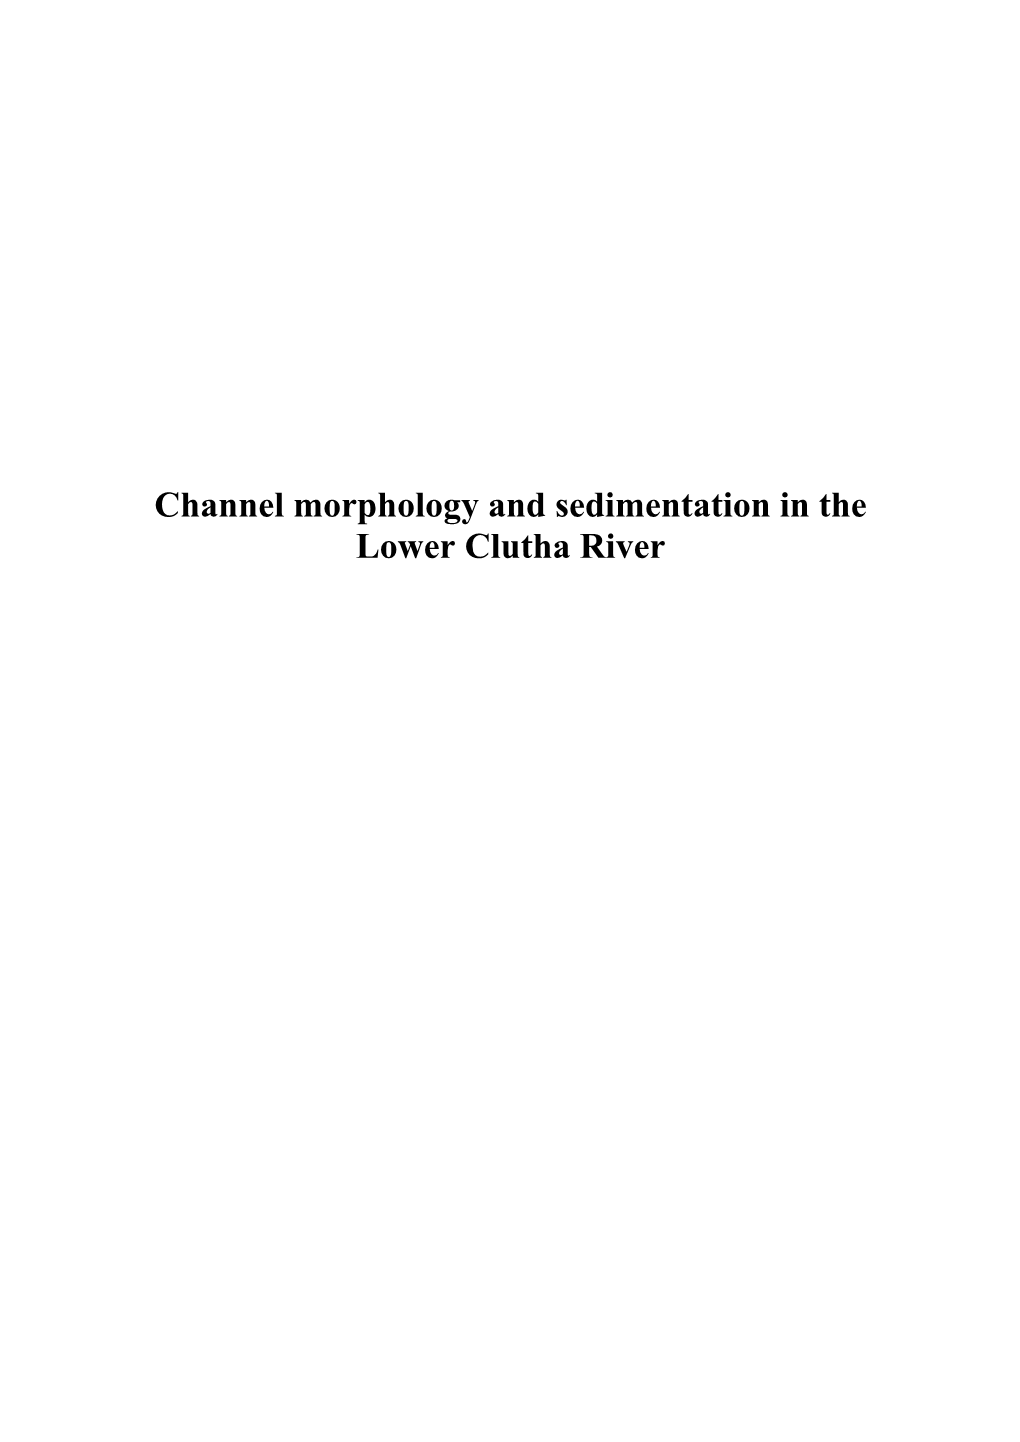 Channel Morphology and Sedimentation in the Lower Clutha River